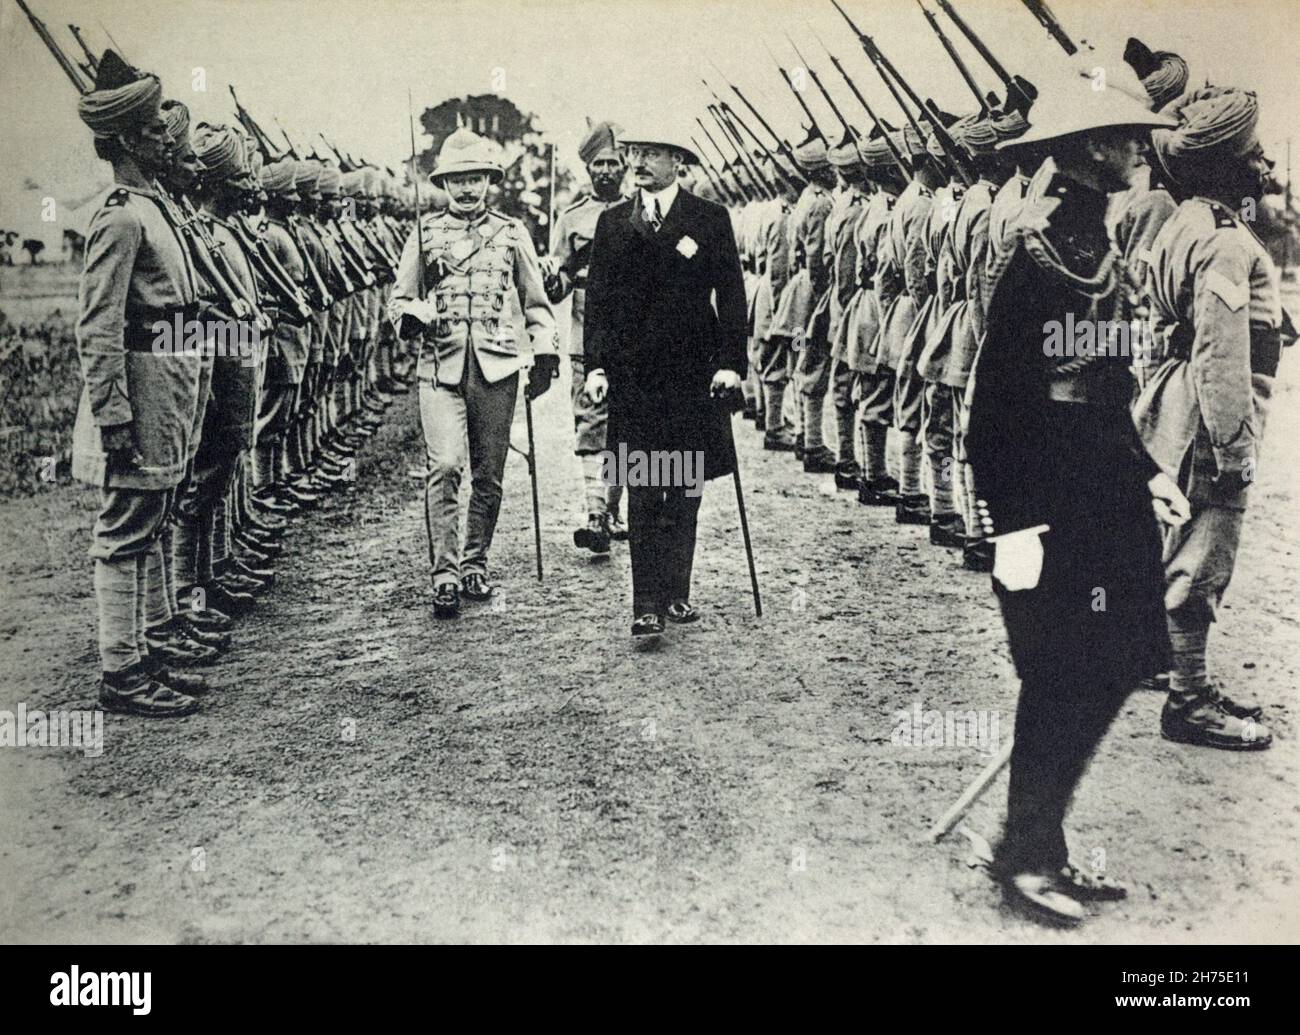 A historical view of British Colonial Indian Soldiers on parade being reviewed by British officers and a civilian administrator. C. 1914. Stock Photo